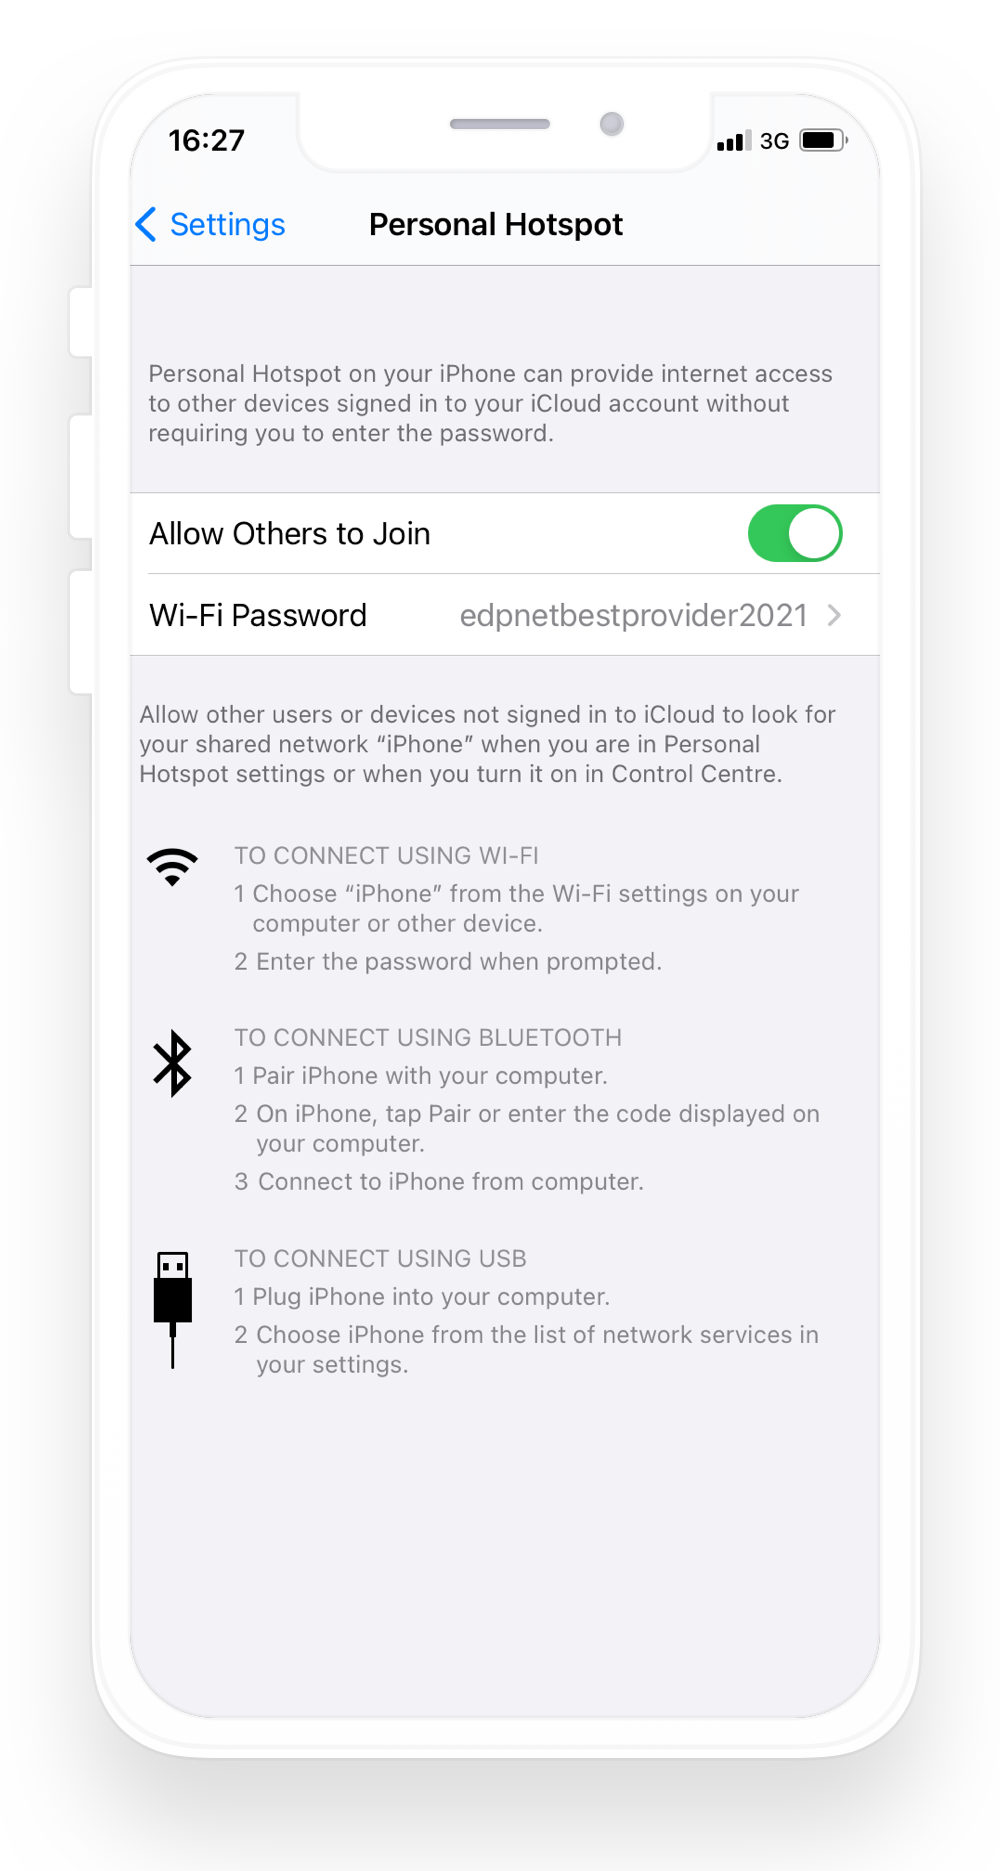 How do I set up a Personal Hotspot on my iPhone